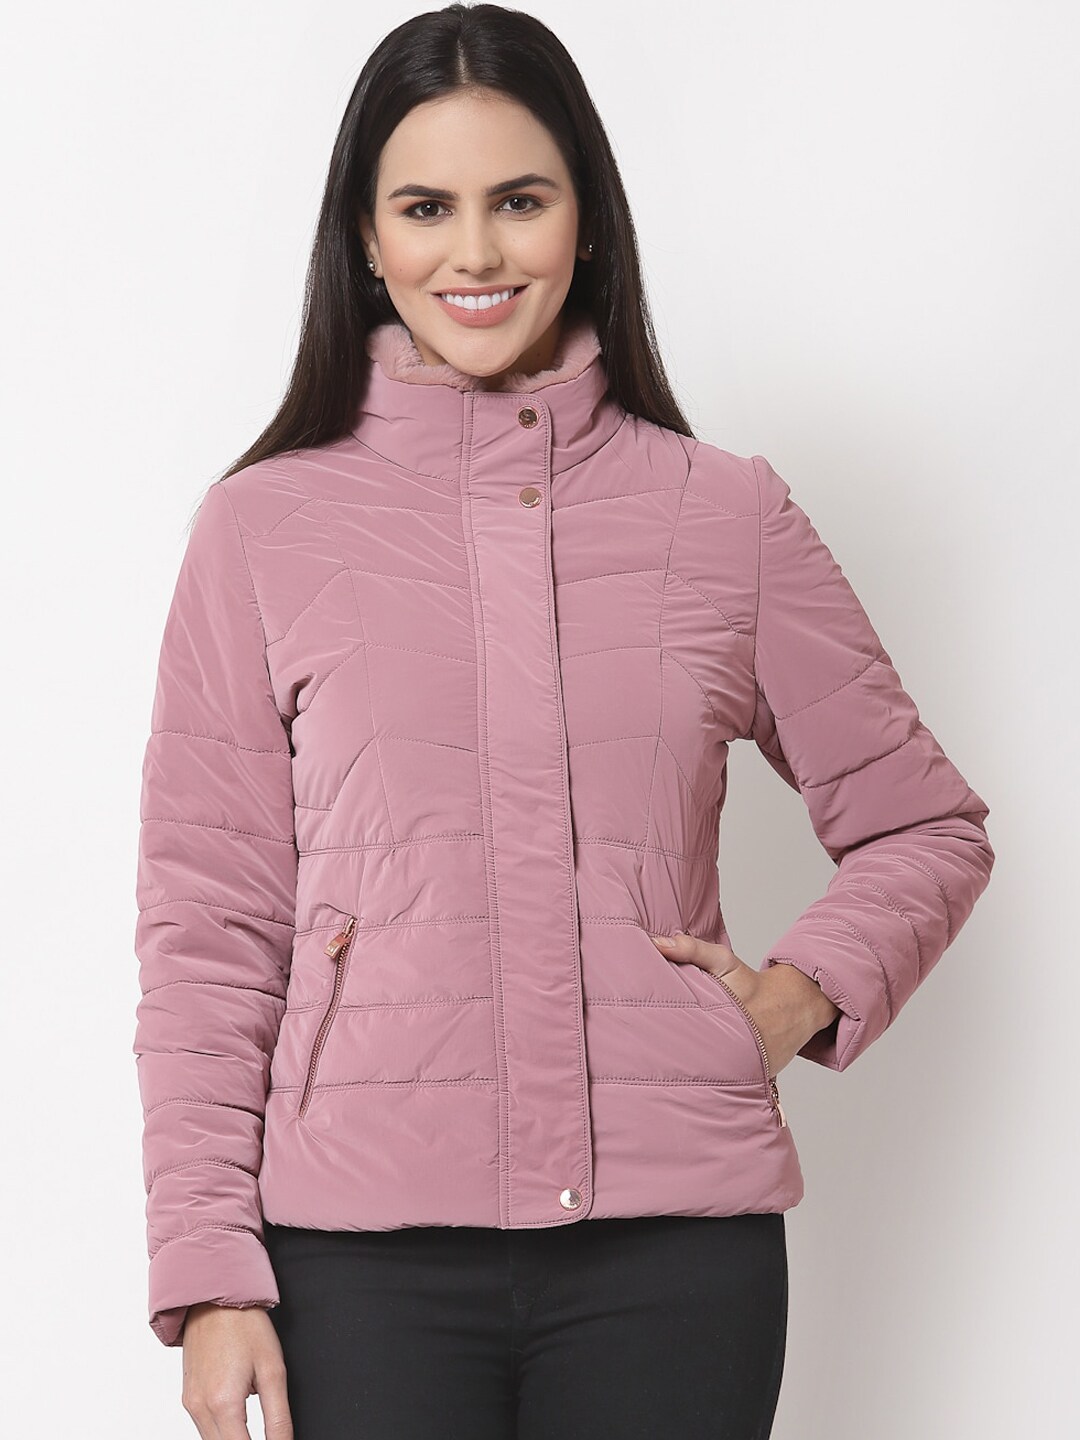 Juelle Women Pink Puffer Jacket Price in India